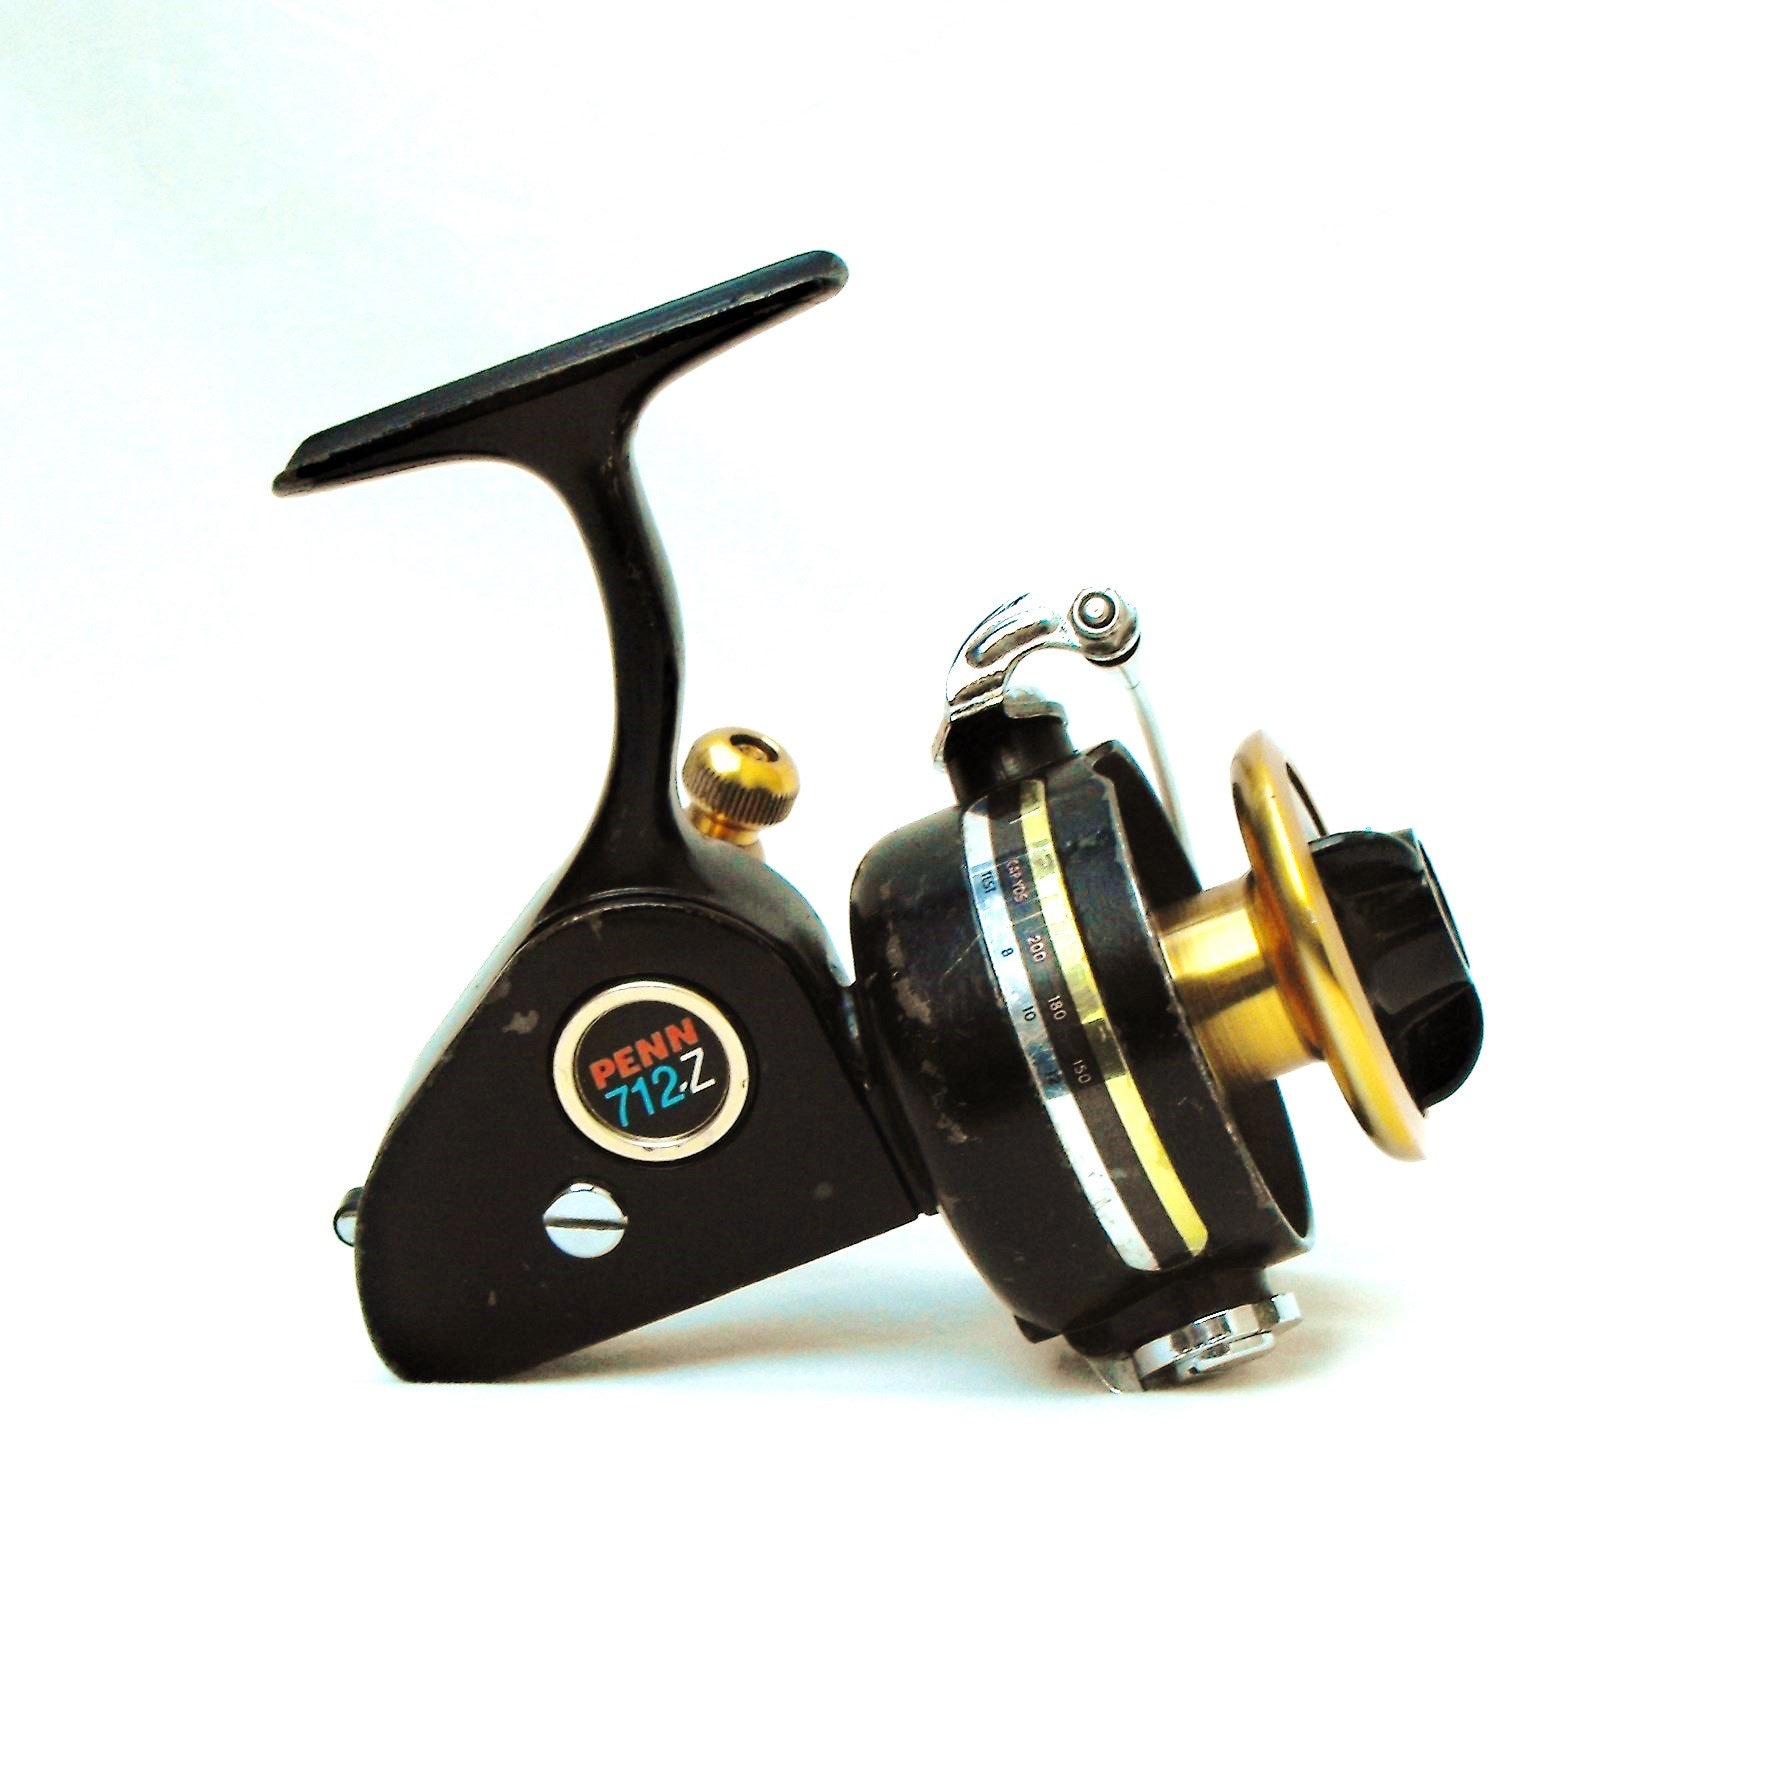 Vintage Penn 712Z Black and Gold Power Drag Spinning Reel Made in USA,  1970's Saltwater Spinfisher, Excellent Fishing Reel, Angler Gift -   Israel